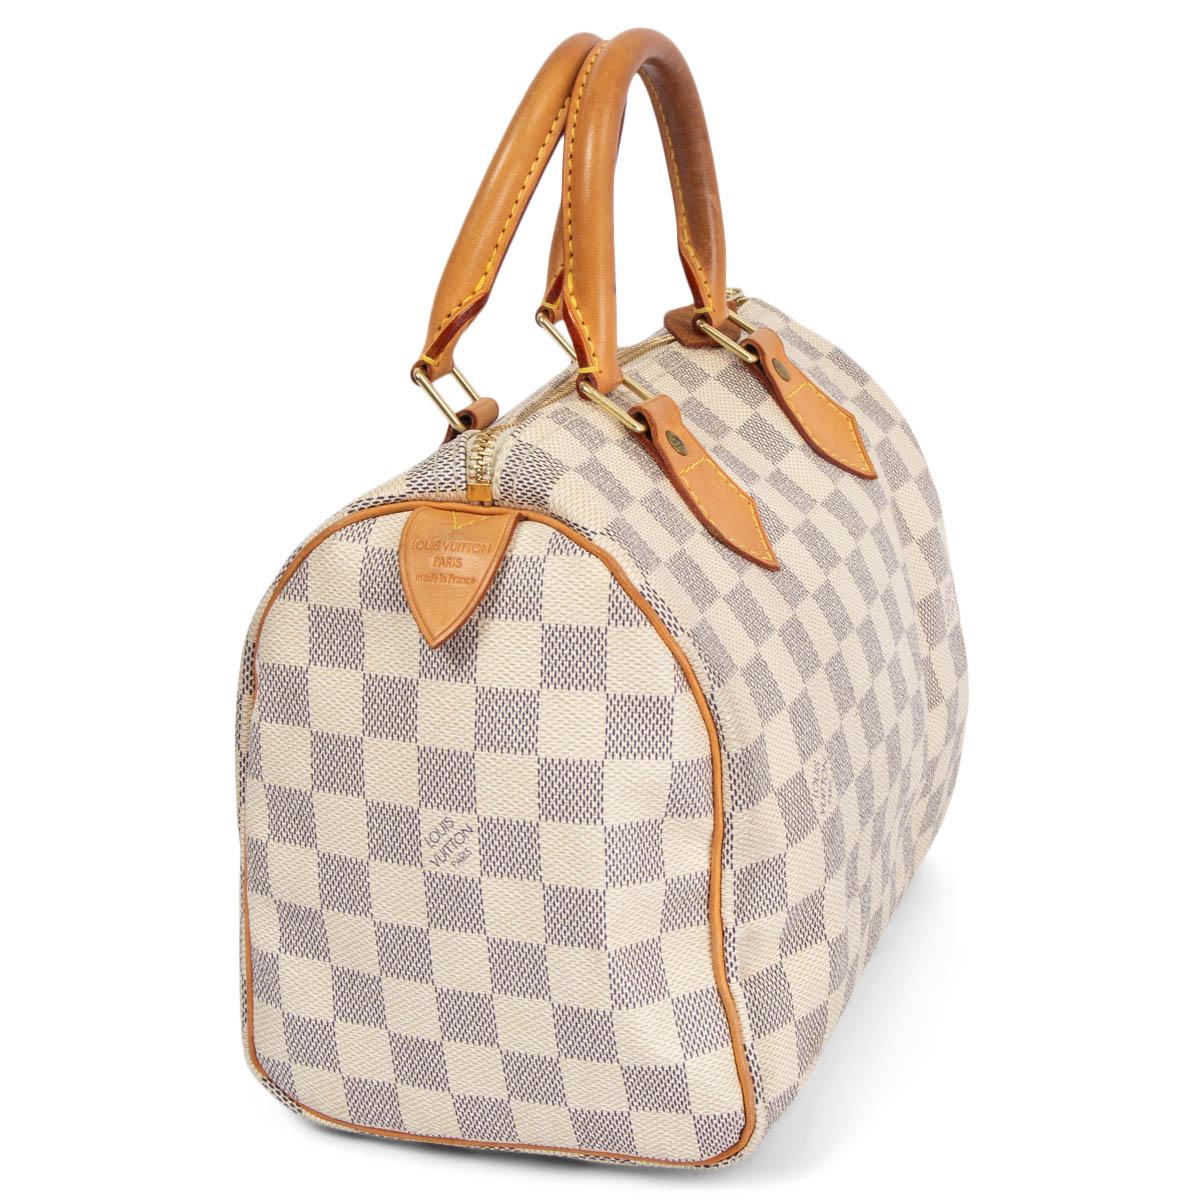 100% authentic Louis Vuitton Speedy 25 in off-white and navy Damier Azur canvas with details in natural leather. Closes with a zipper on top. Lined in canvas with an open pocket against the back. Has been carried with some darkening the handles.